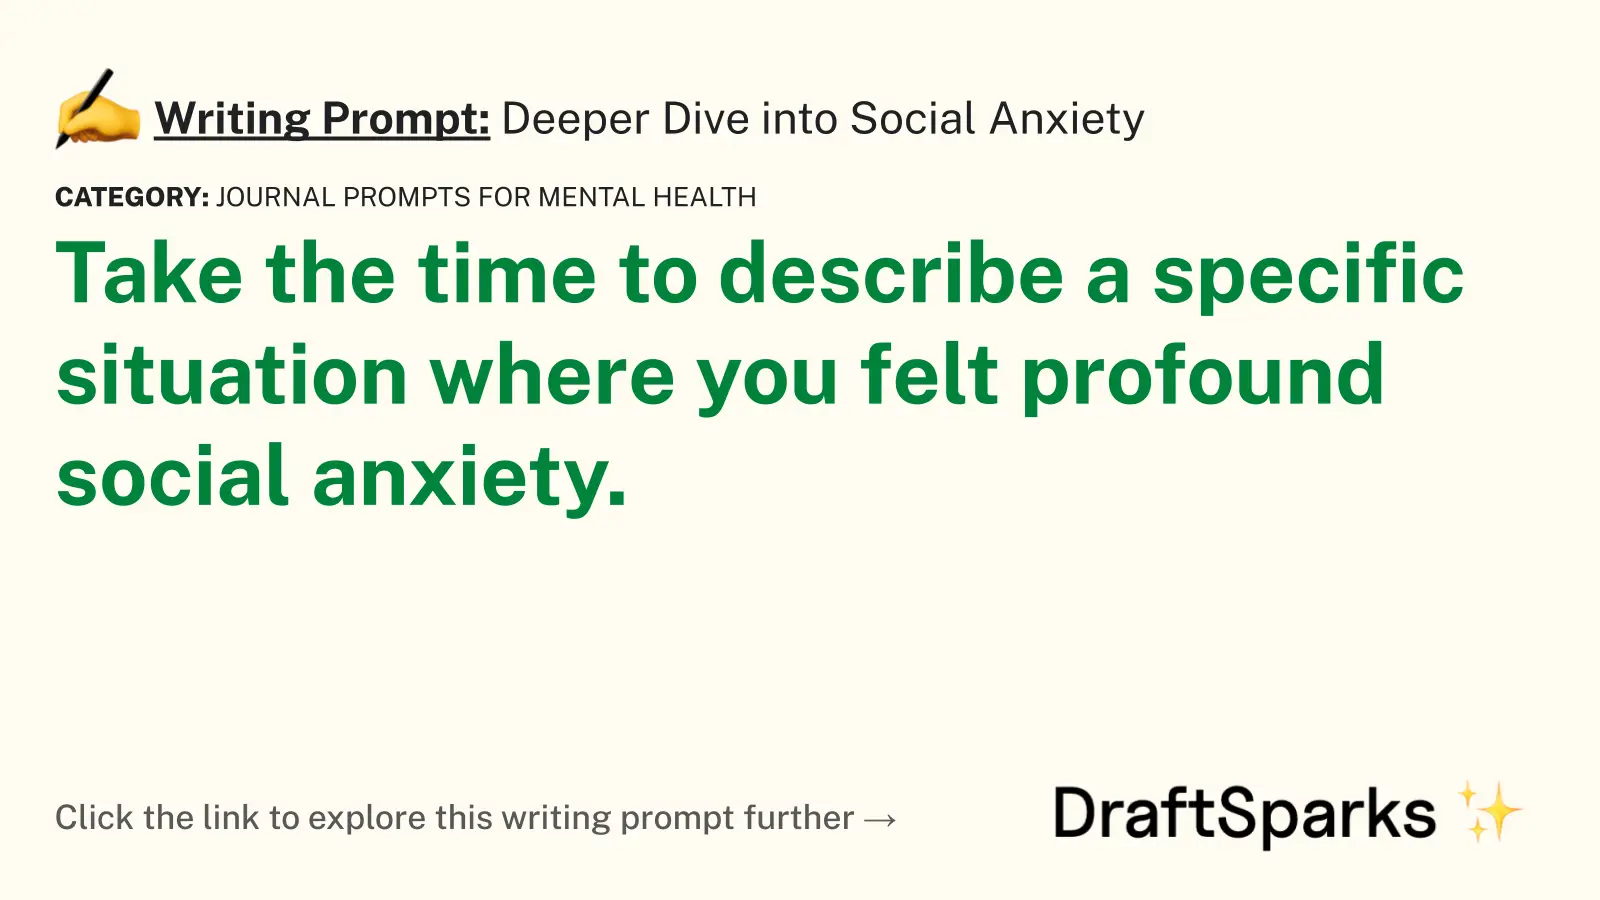 Deeper Dive into Social Anxiety